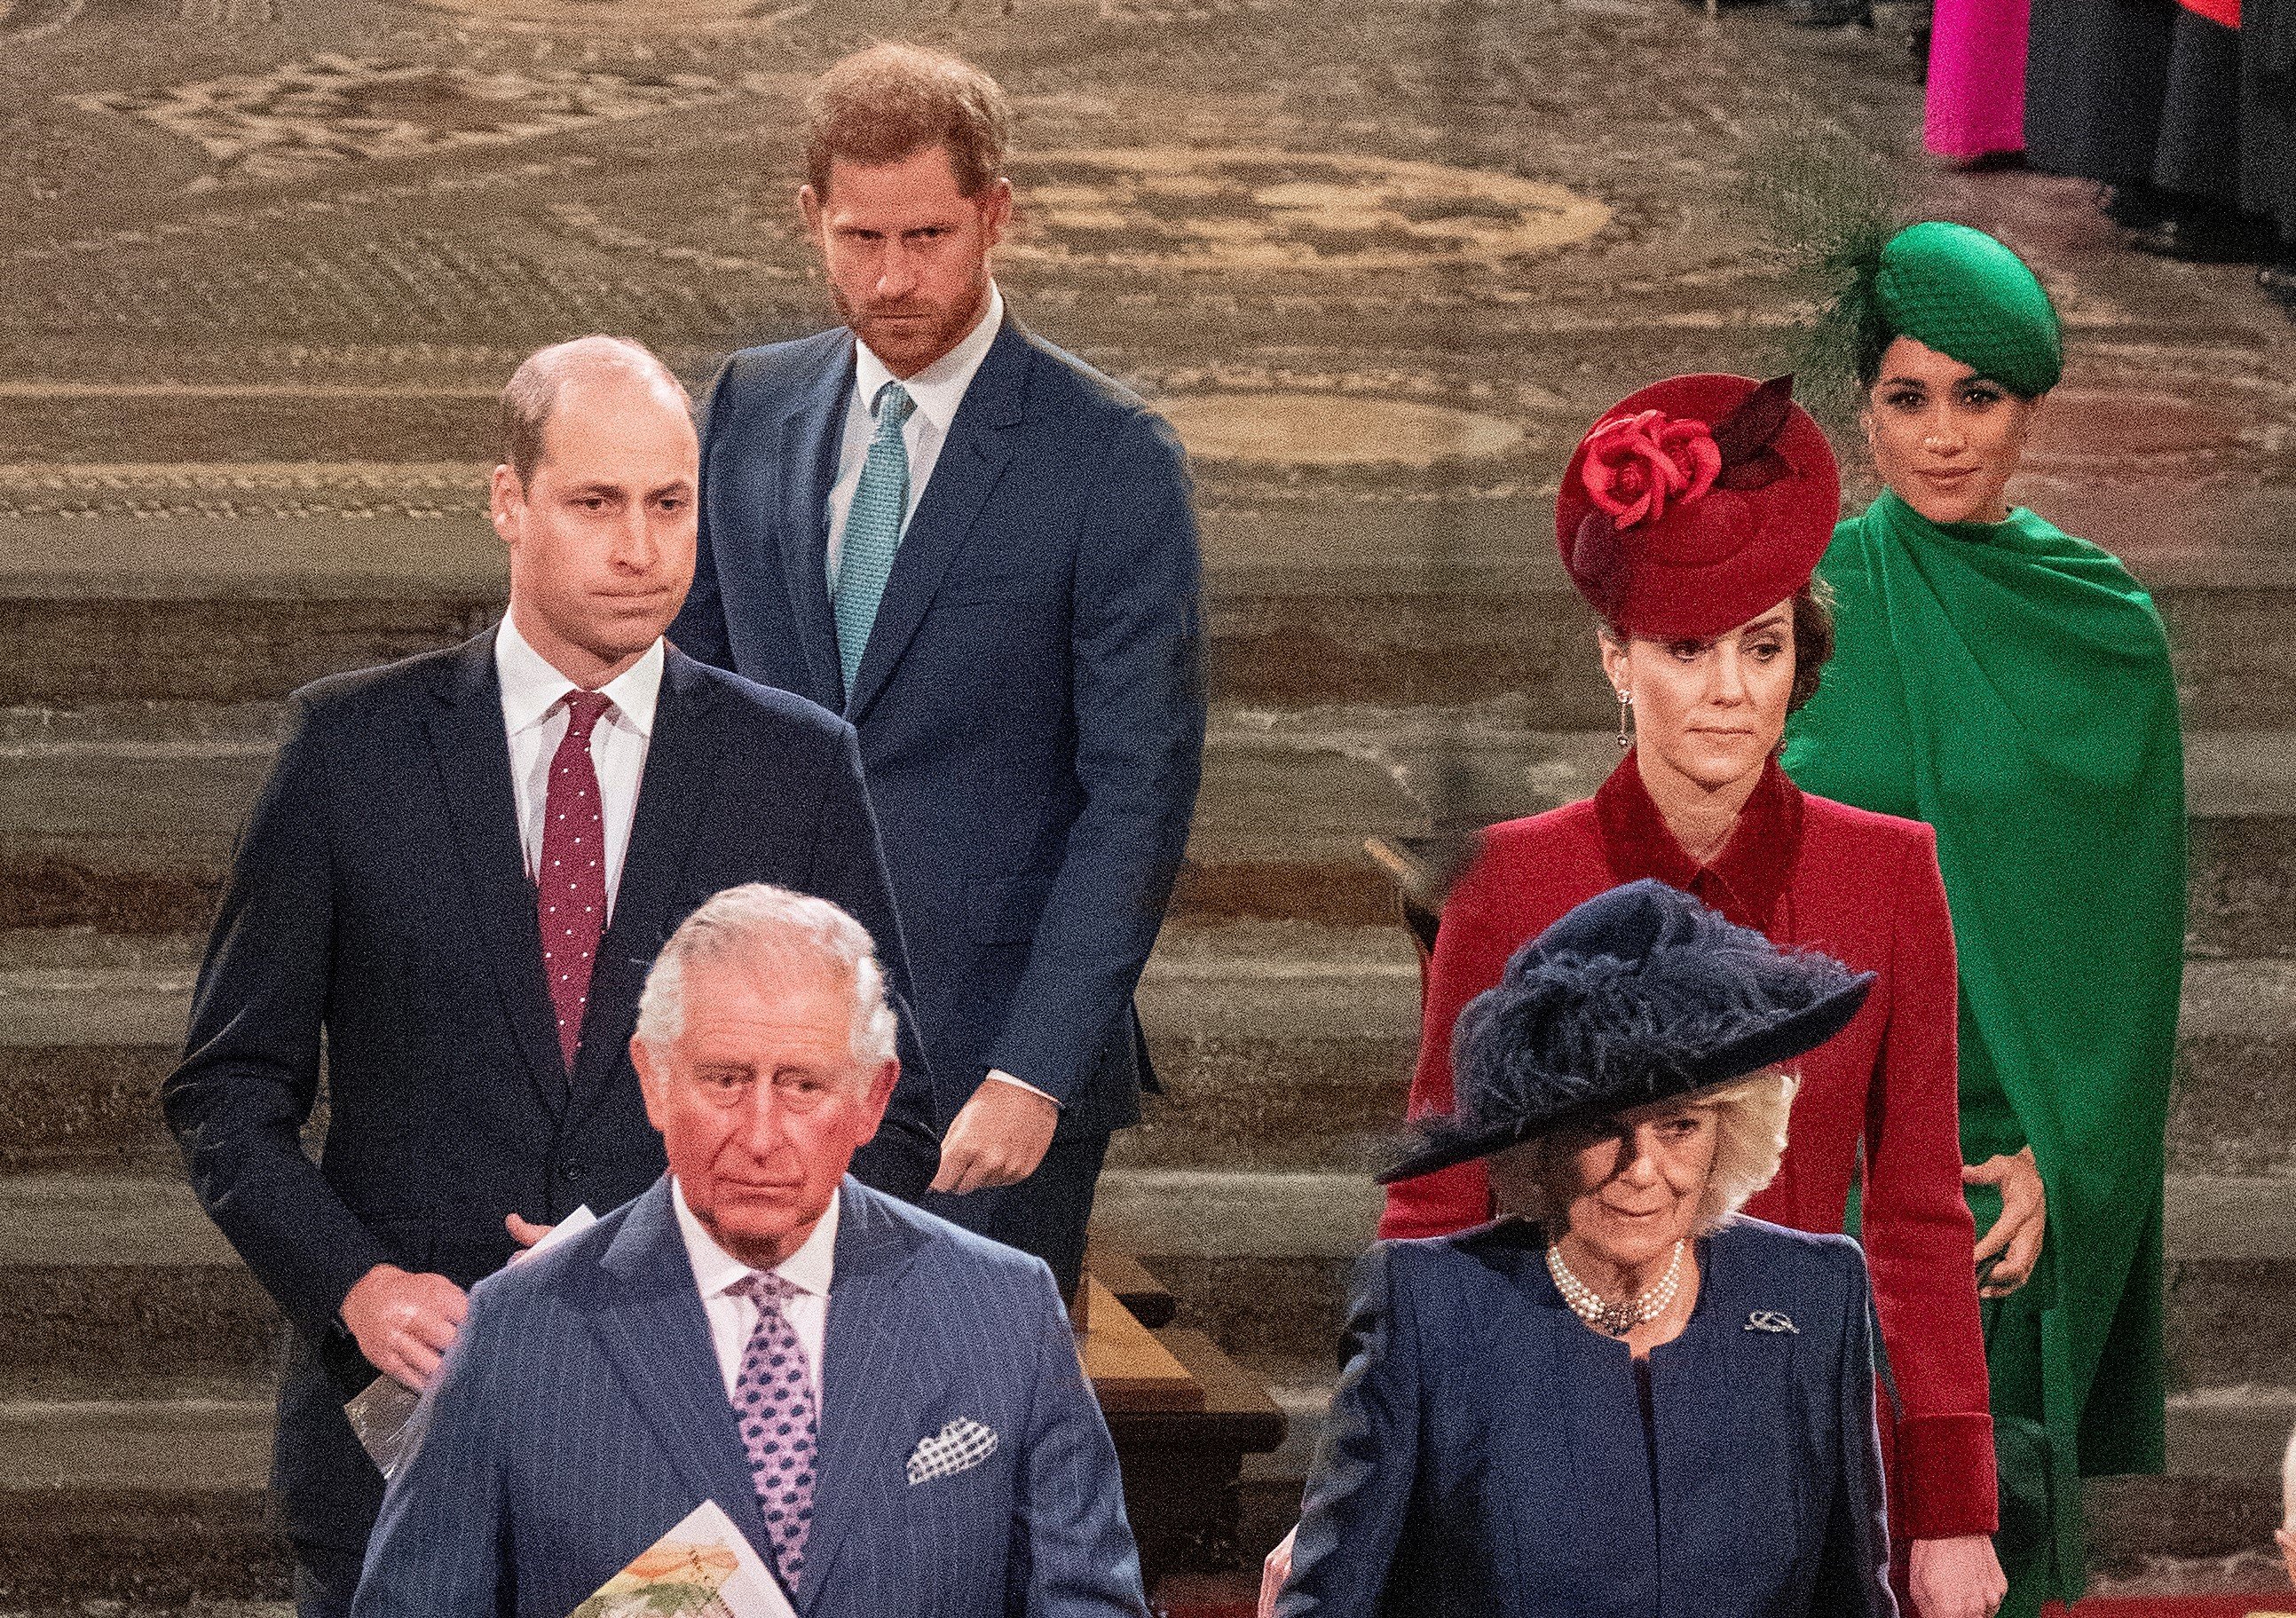 Prince William, Kate Middleton, Prince Harry, and Meghan Markle attending Commonwealth Day Service